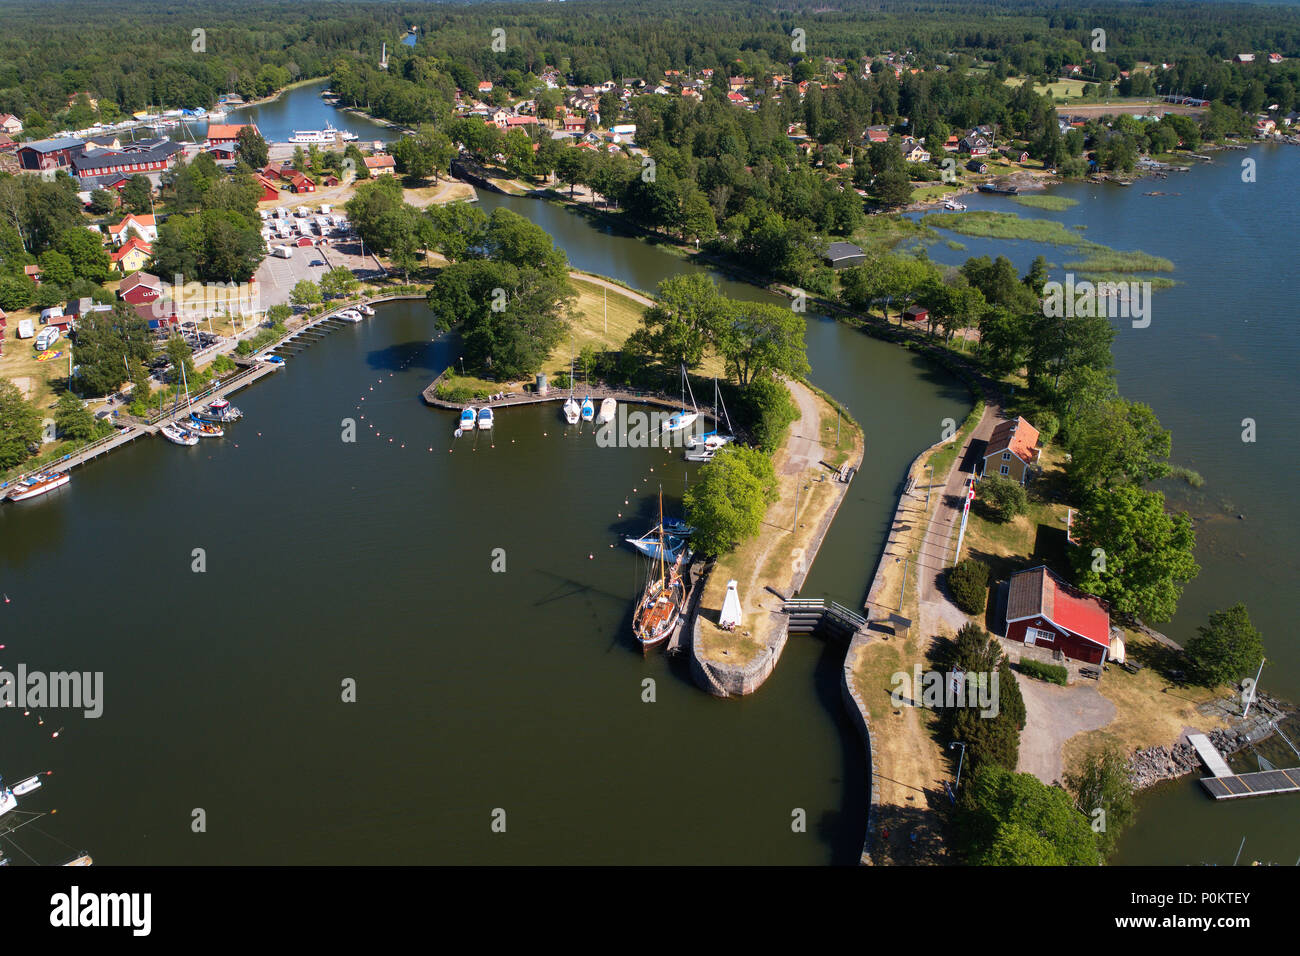 Sjotorp, Sweden - June 8, 2018: Aerial view of the Sjotorp locking aera where the Gota canal and lake Vanern connects. Stock Photo